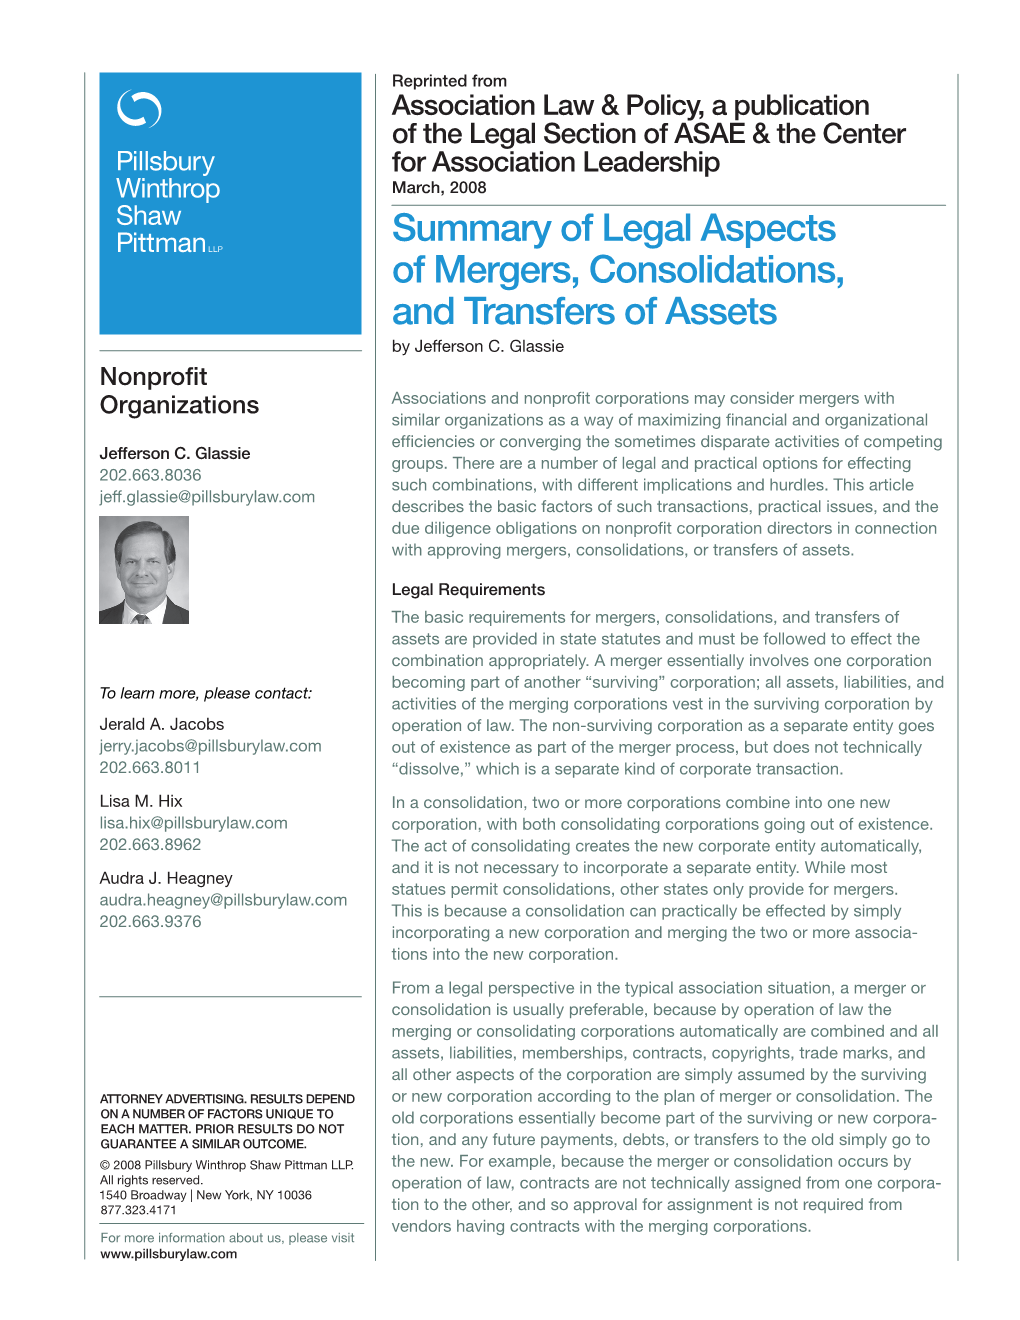 Summary of Legal Aspects of Mergers, Consolidations, and Transfers of Assets by Jefferson C